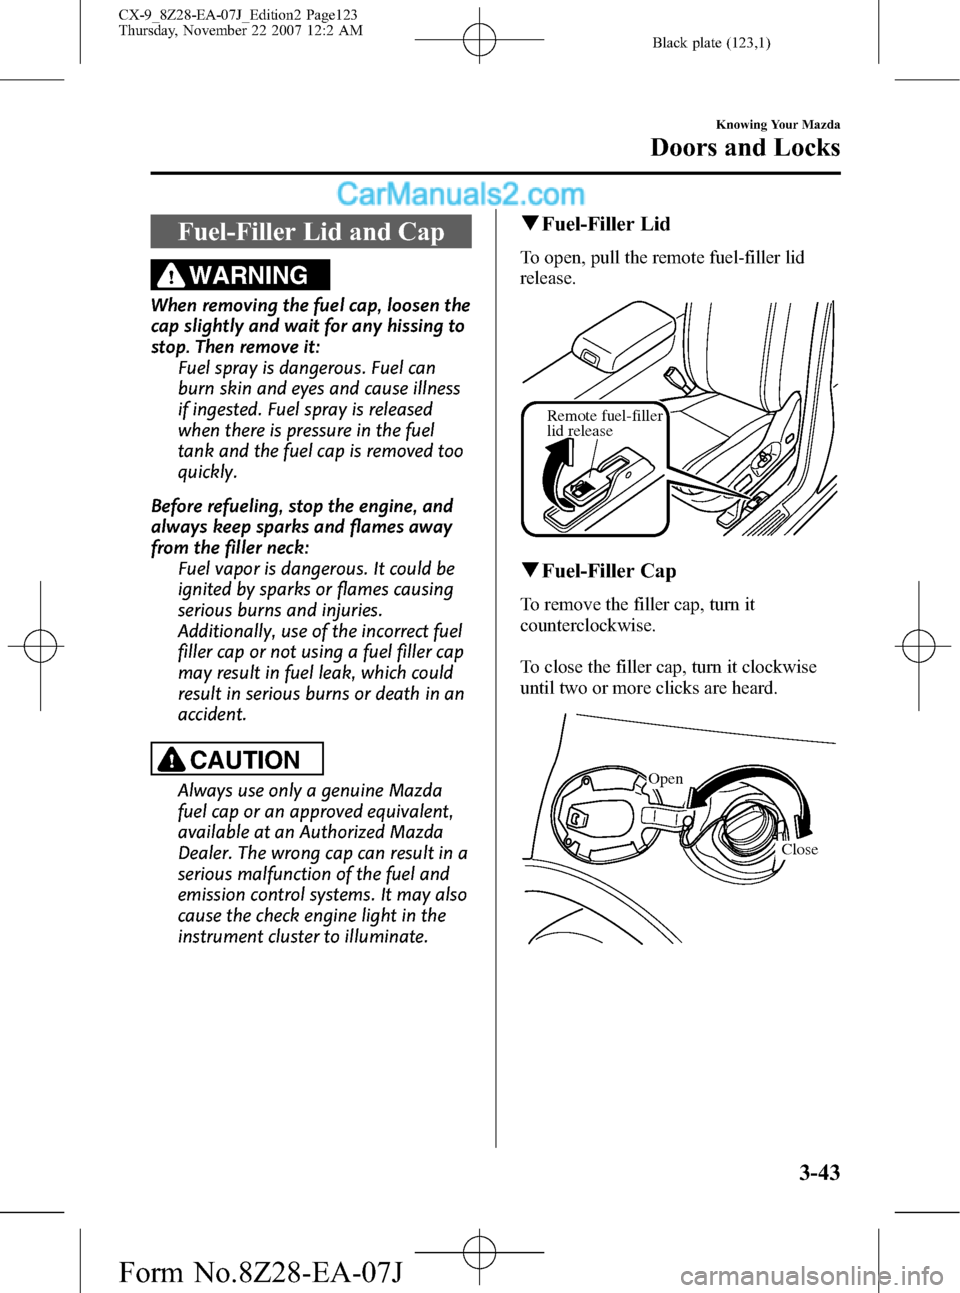 MAZDA MODEL CX-9 2008  Owners Manual (in English) Black plate (123,1)
Fuel-Filler Lid and Cap
WARNING
When removing the fuel cap, loosen the
cap slightly and wait for any hissing to
stop. Then remove it:
Fuel spray is dangerous. Fuel can
burn skin an